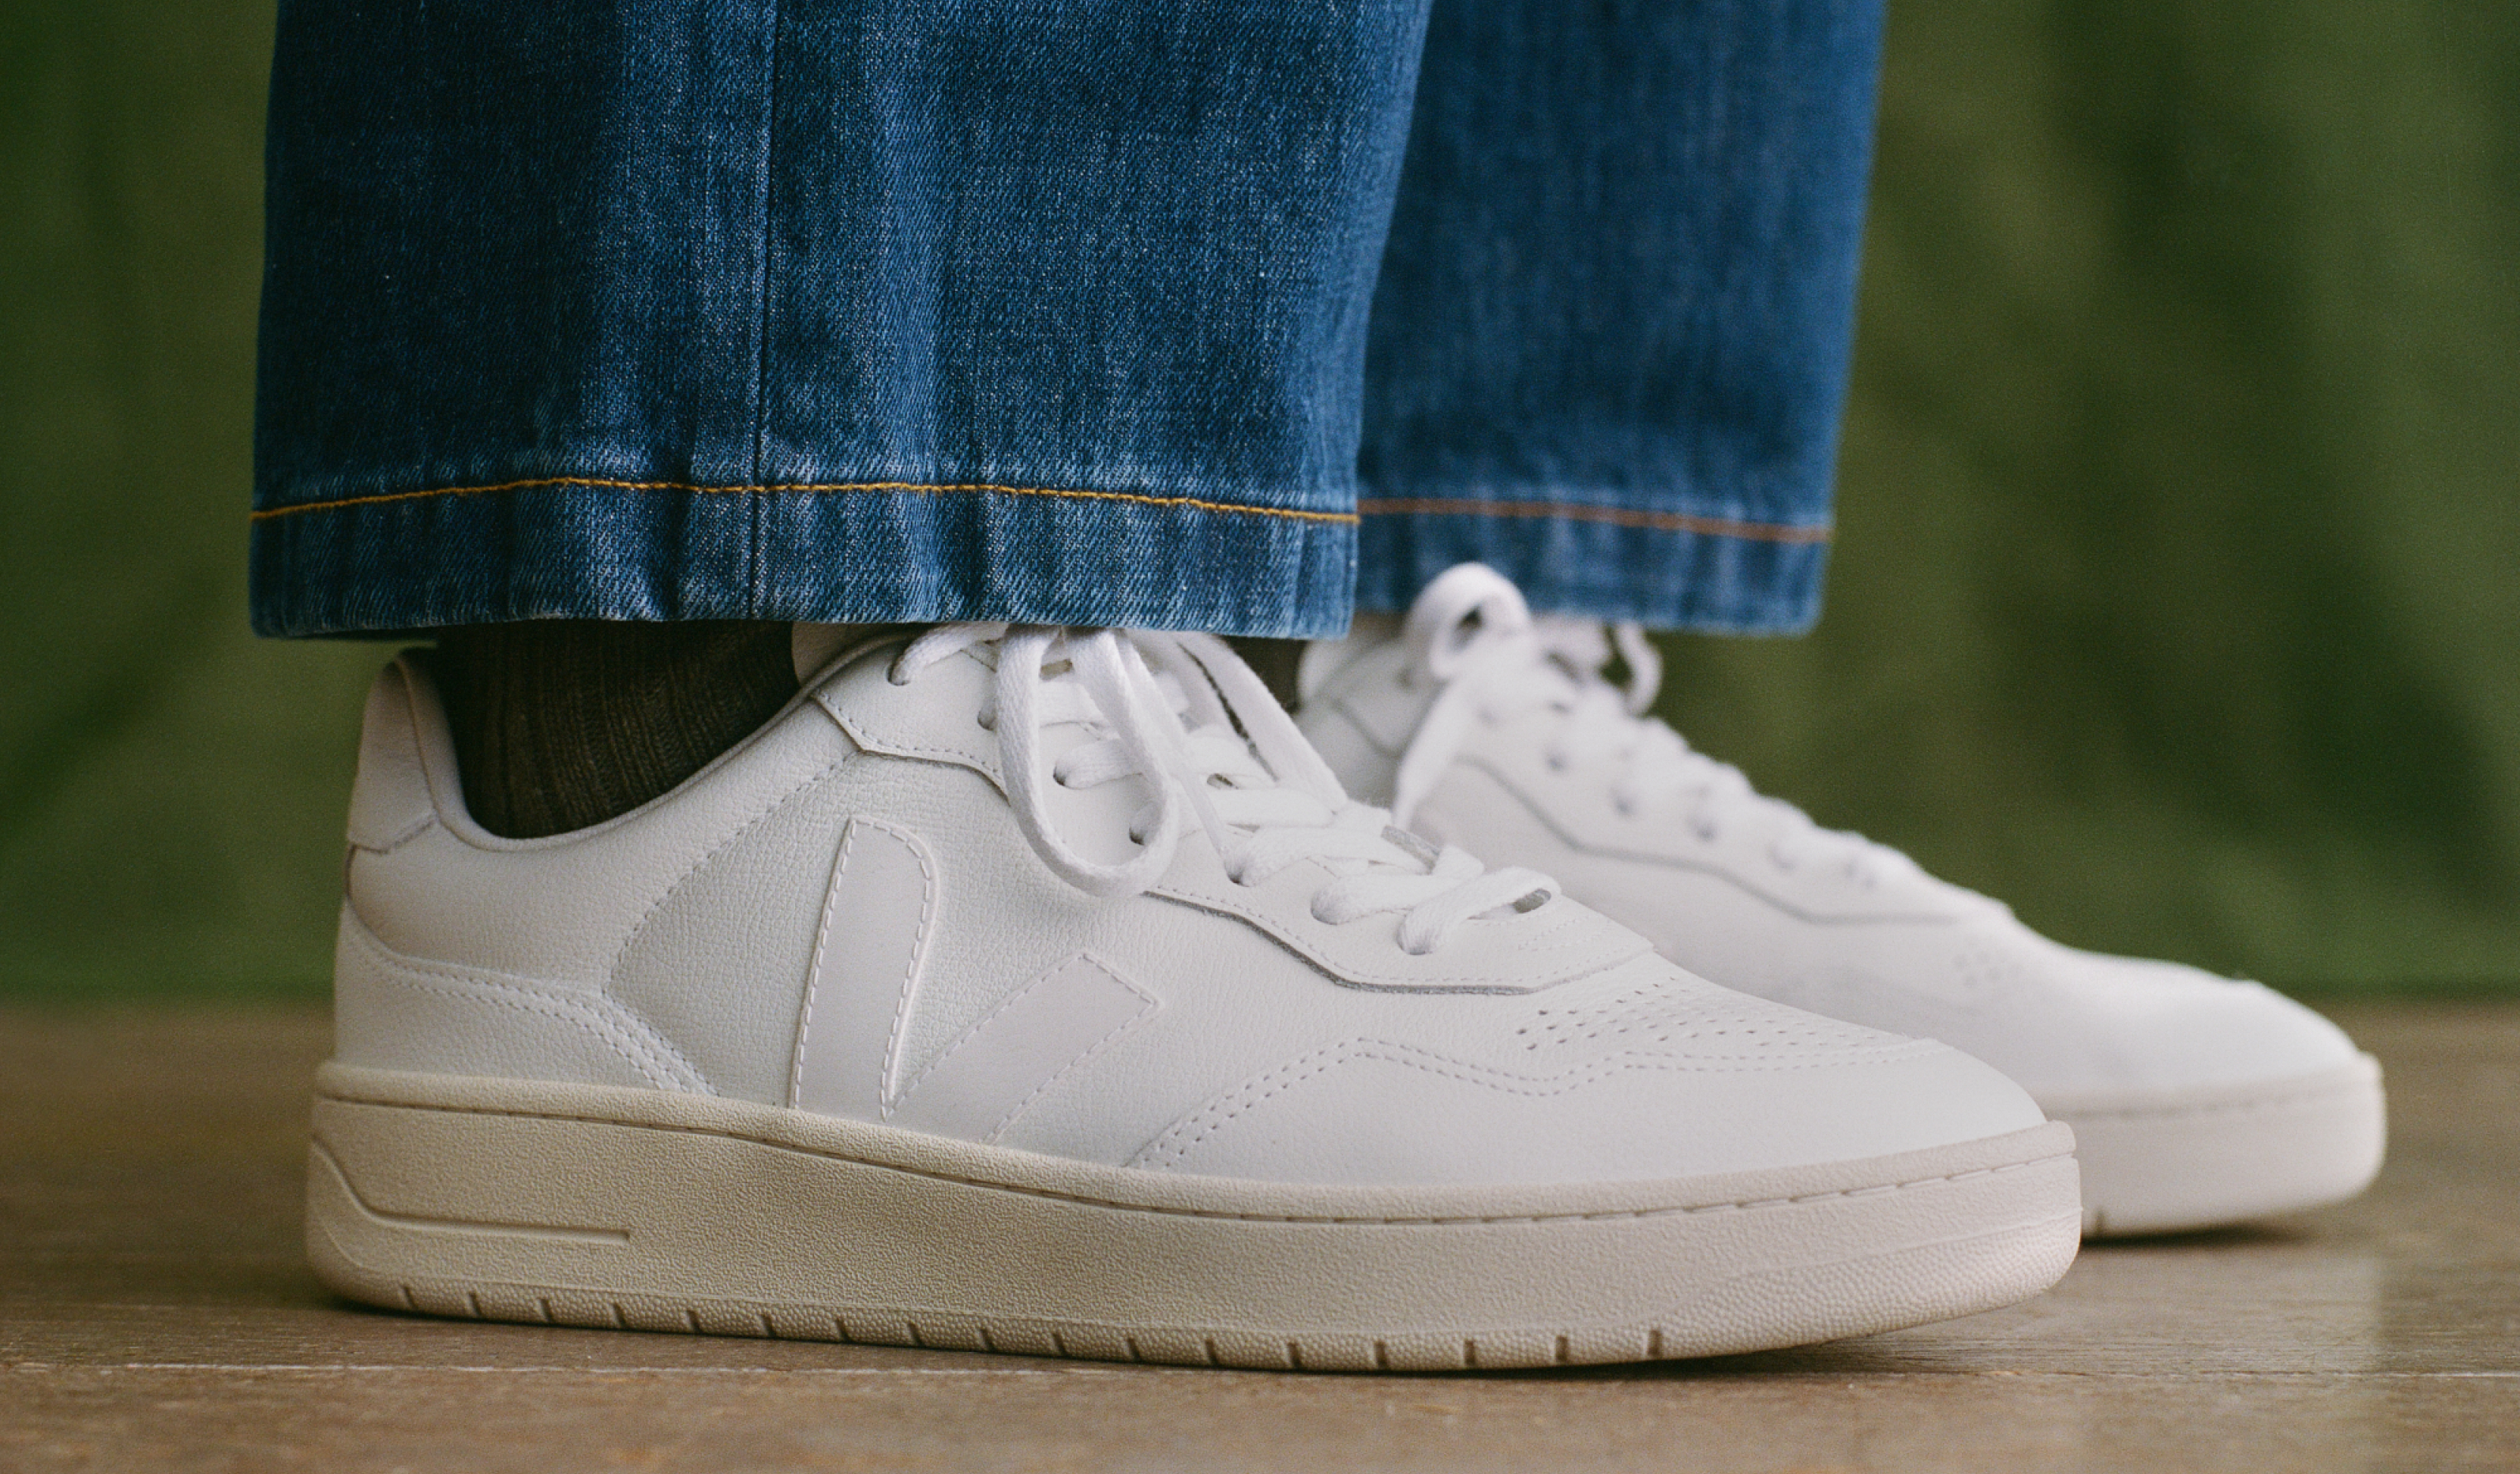 VEJA – Official US site, Transparency, organic materials, fair trade  sourcing.